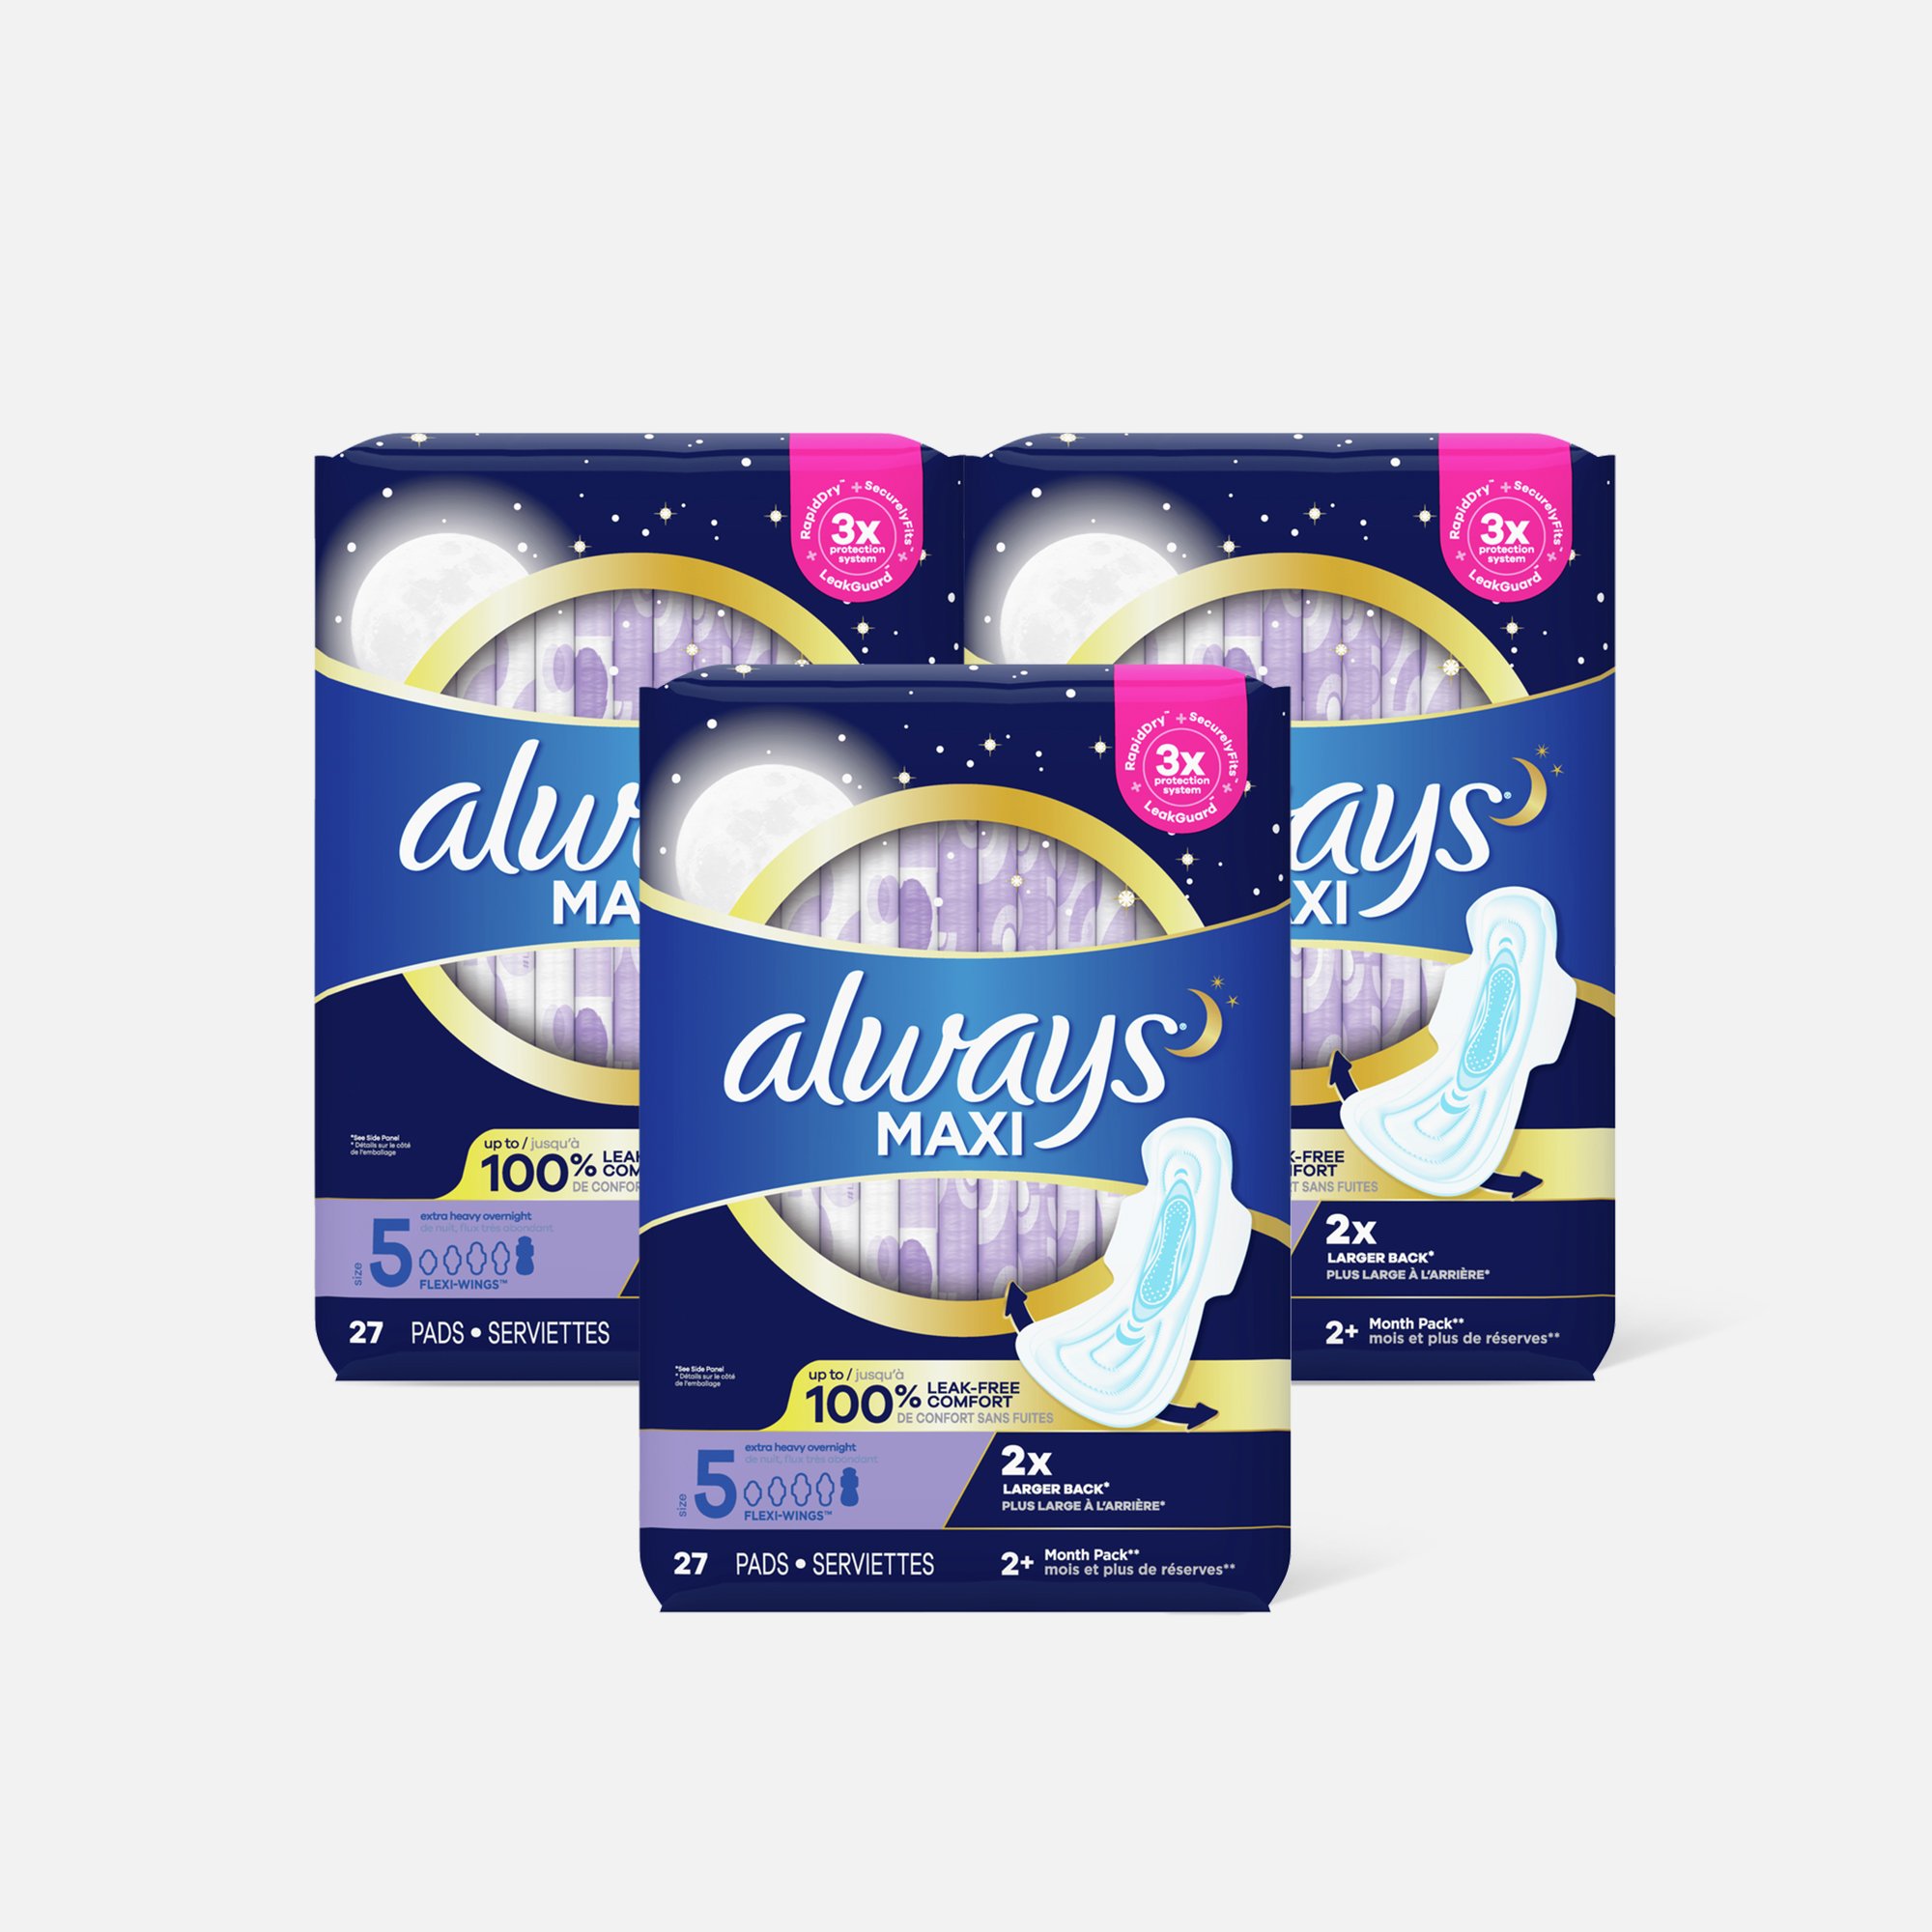 Always Ultra Thin Pads Extra Heavy Overnight Absorbency Unscented